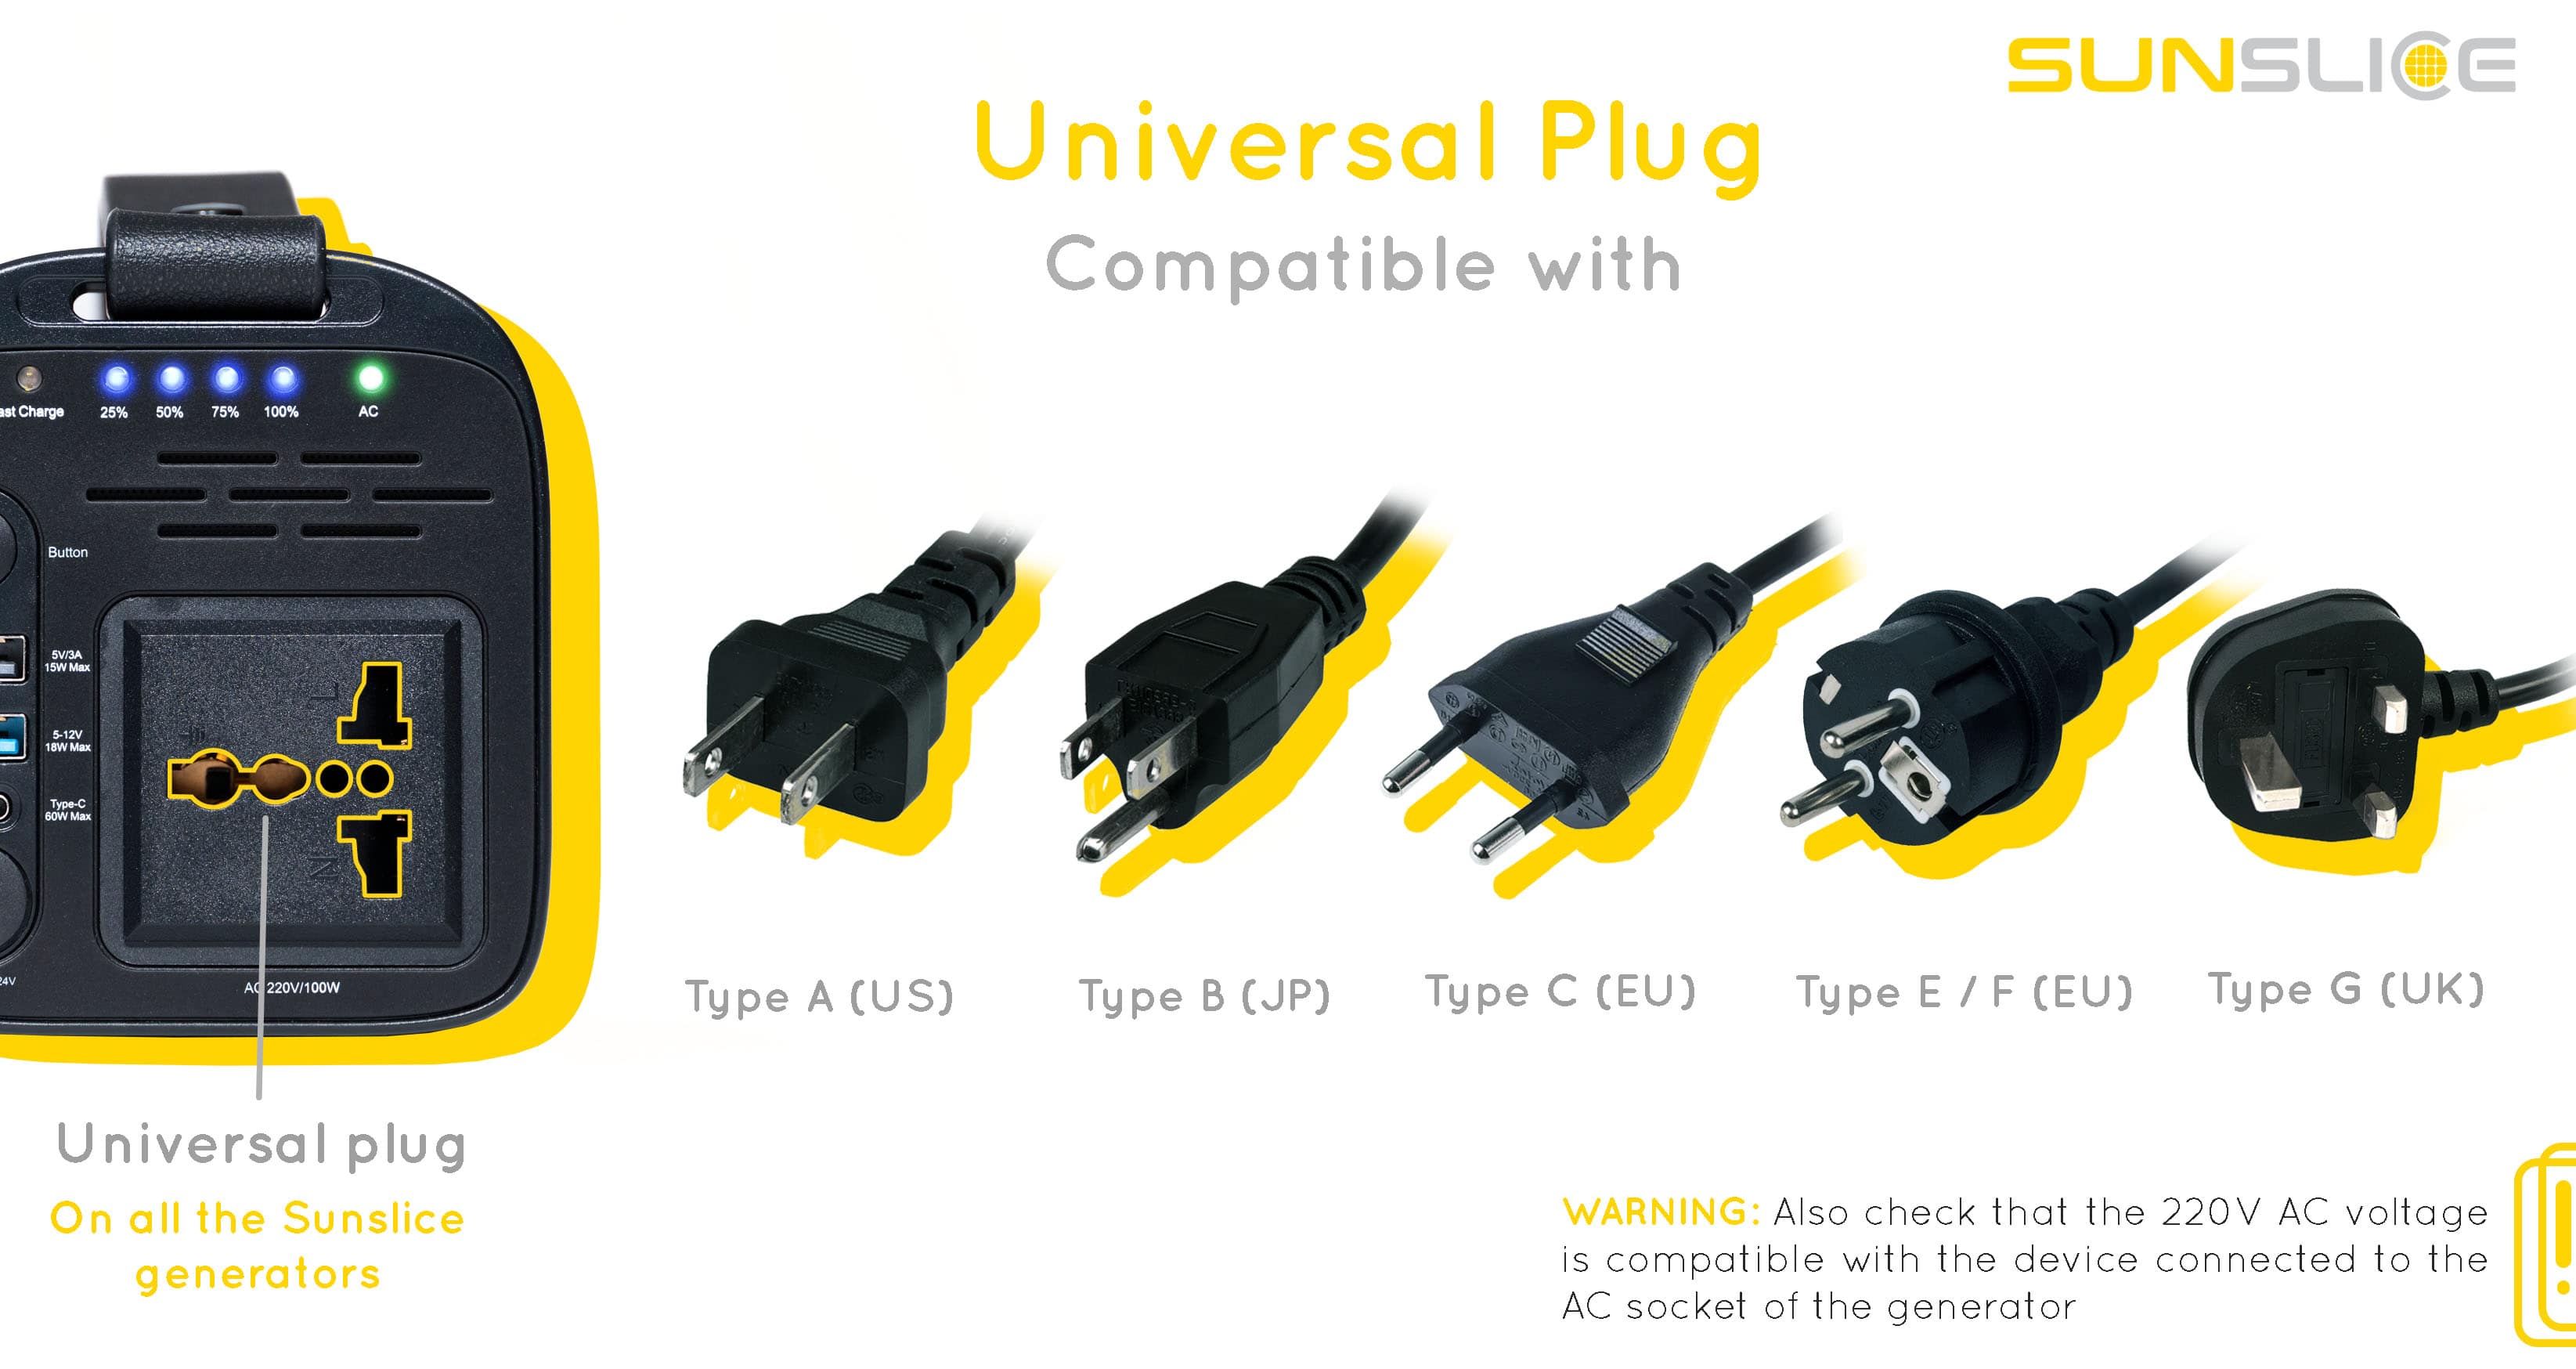 Explaination on the different type of plug who go into a Universal plug on all the sunslice generator